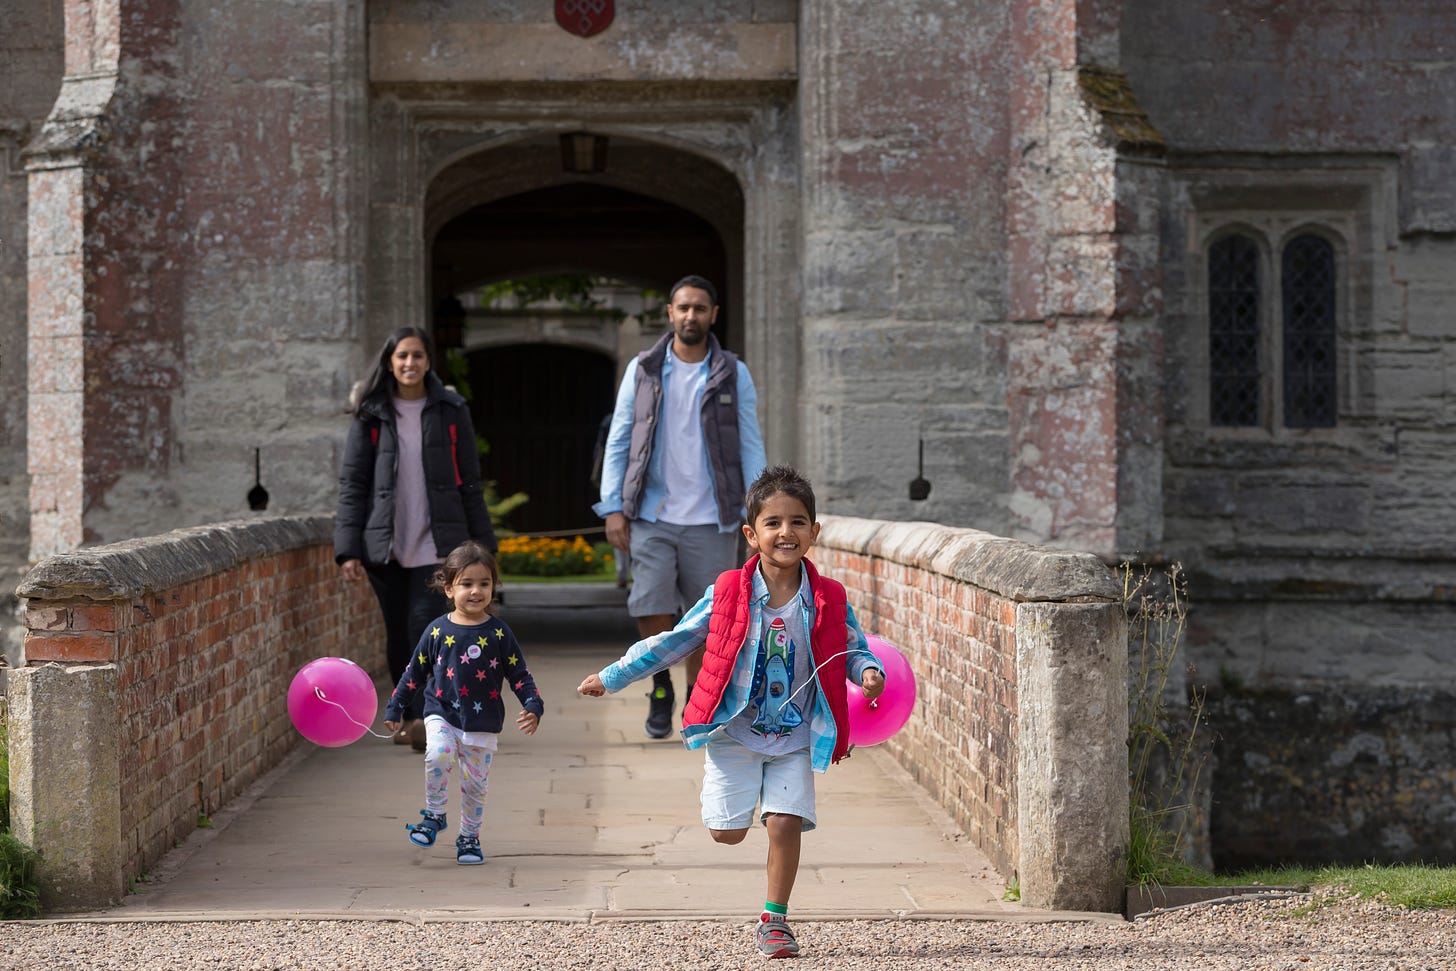 Heritage Open Days at Baddesley Clinton, Warwickshire © Heritage Open Days / Chris Lacey  